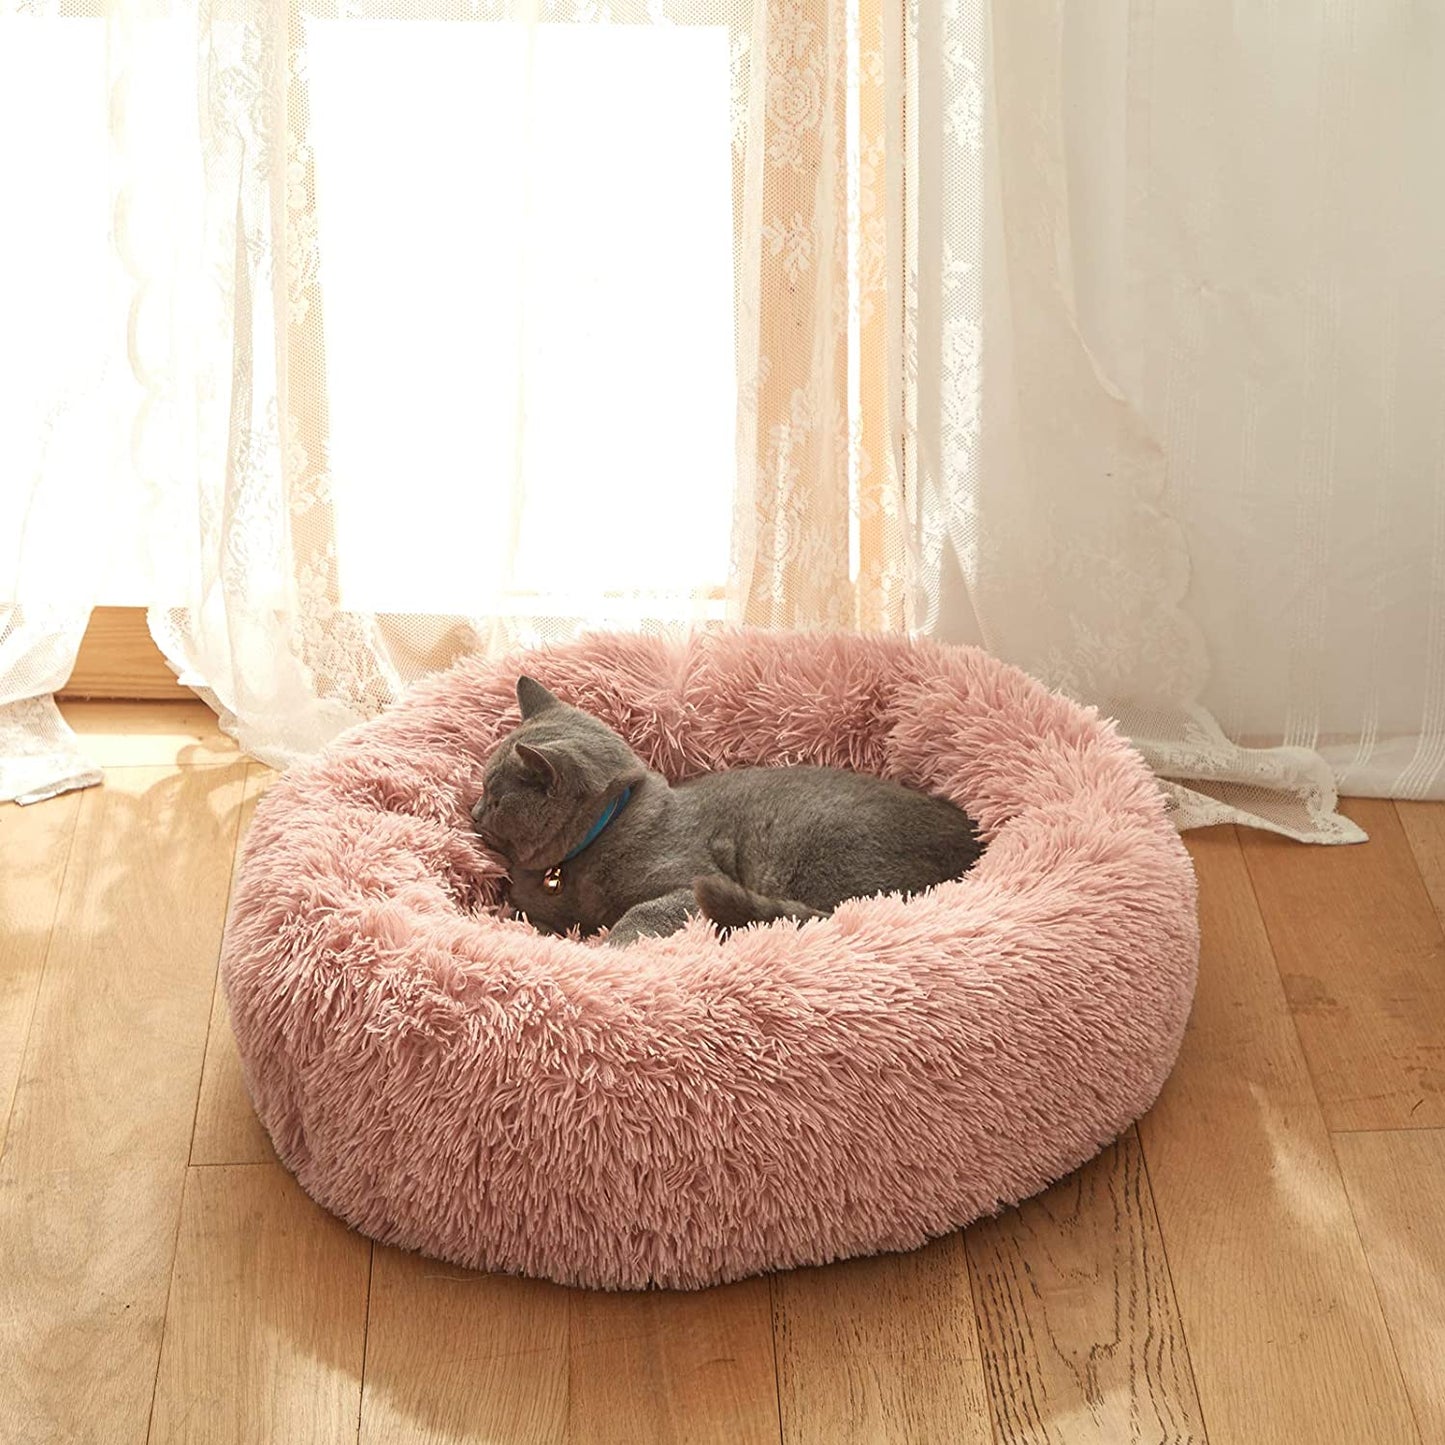 Plush Faux Fur round Pet Dog Bed, Comfortable Fuzzy Donut Cuddler Cushion for Dogs & Cats, Soft Shaggy and Warm for Winter (Pink, 23.6")